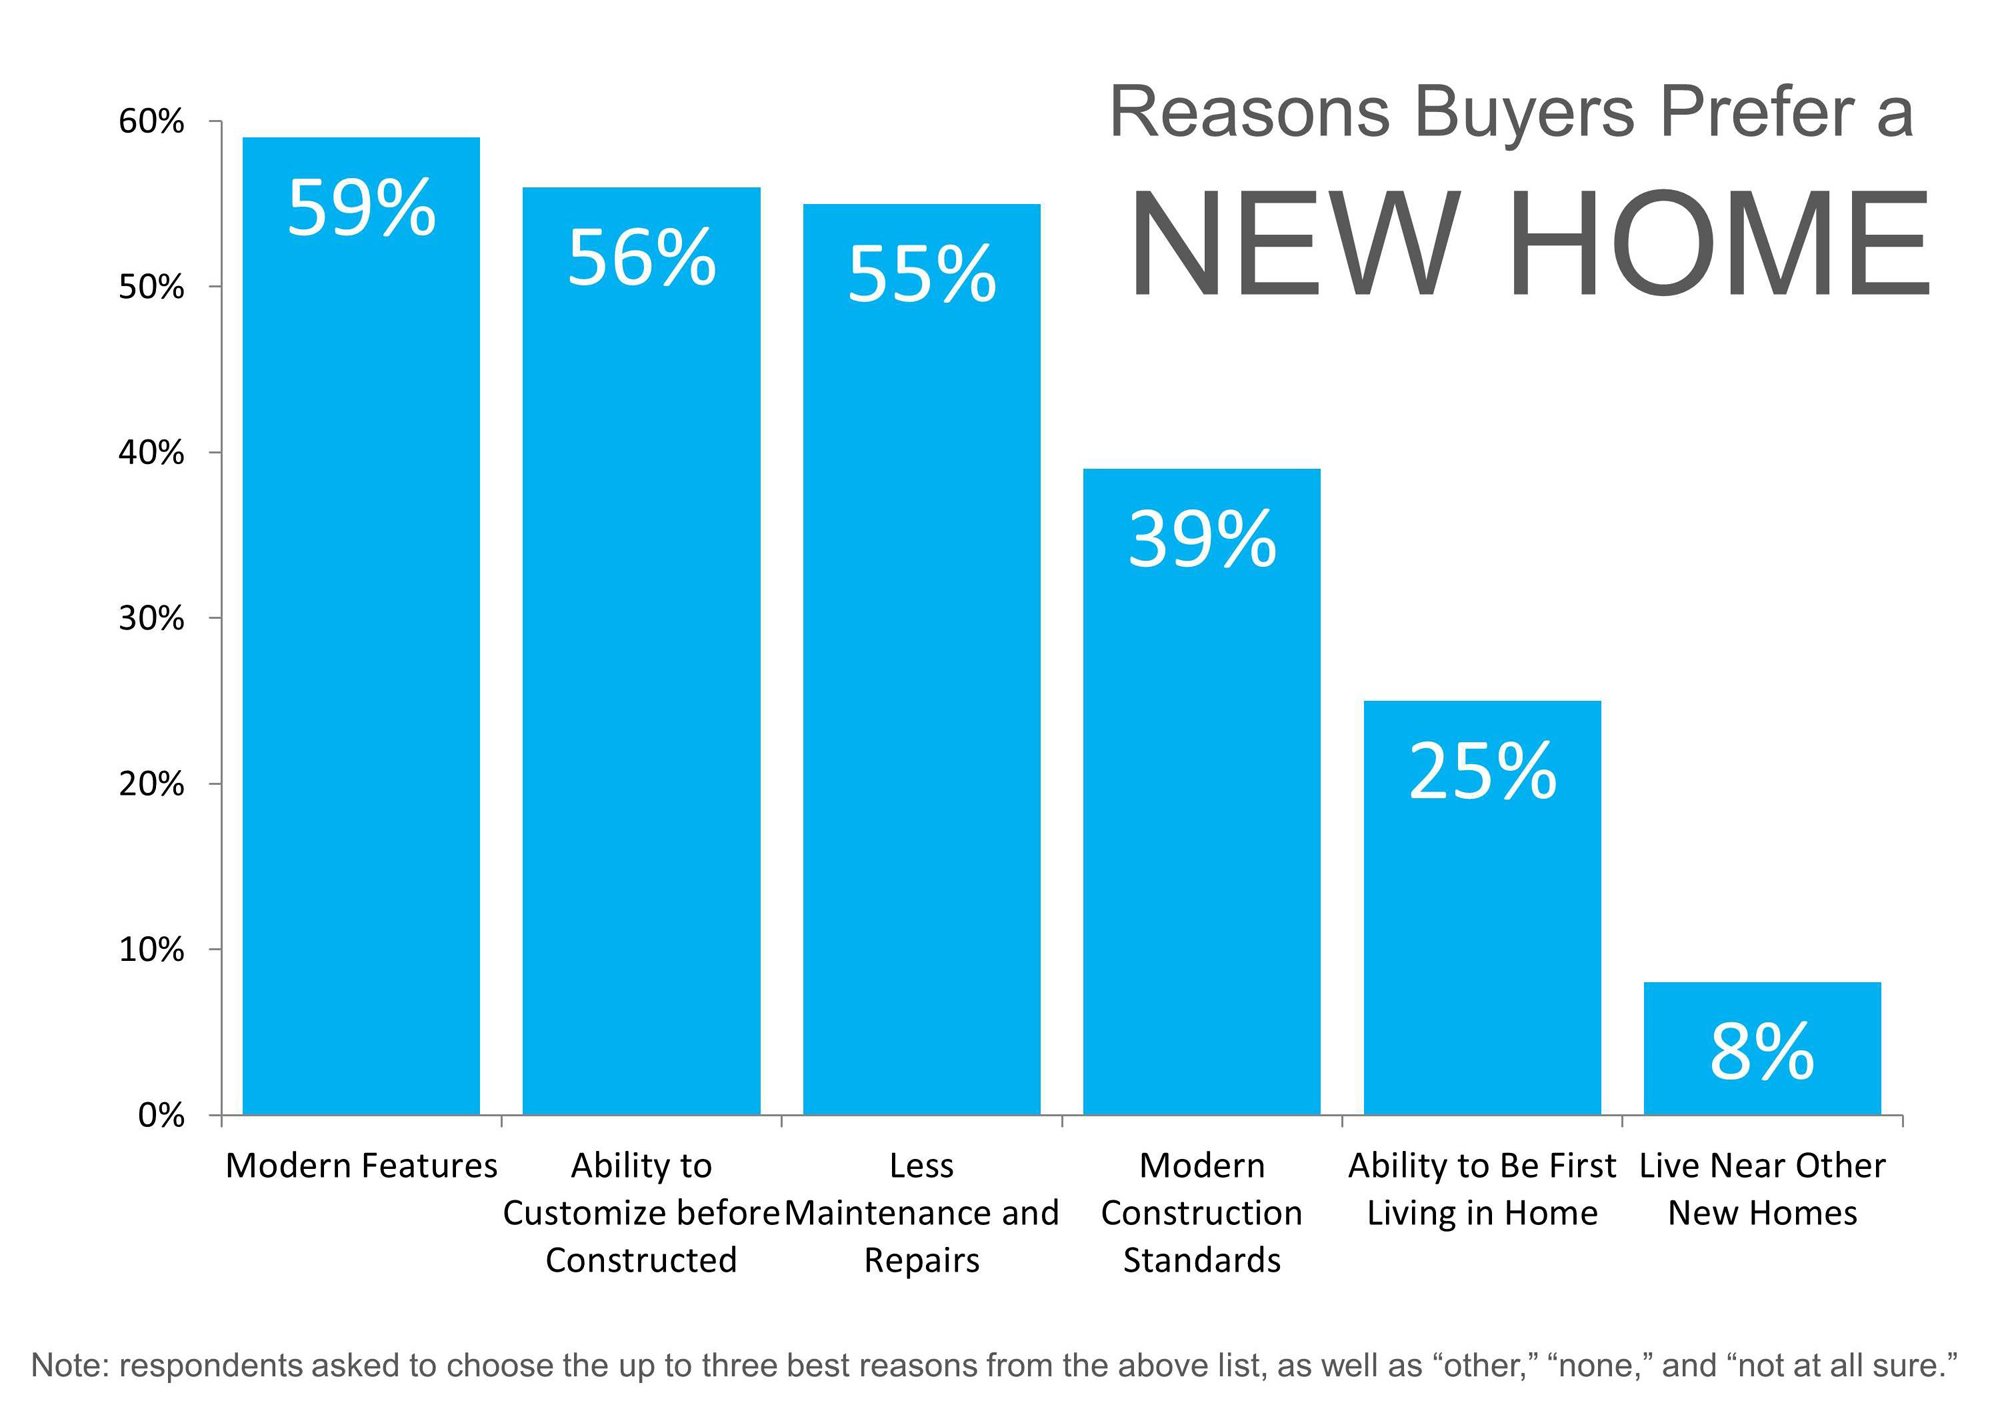 Reasons to Buy a New Home1